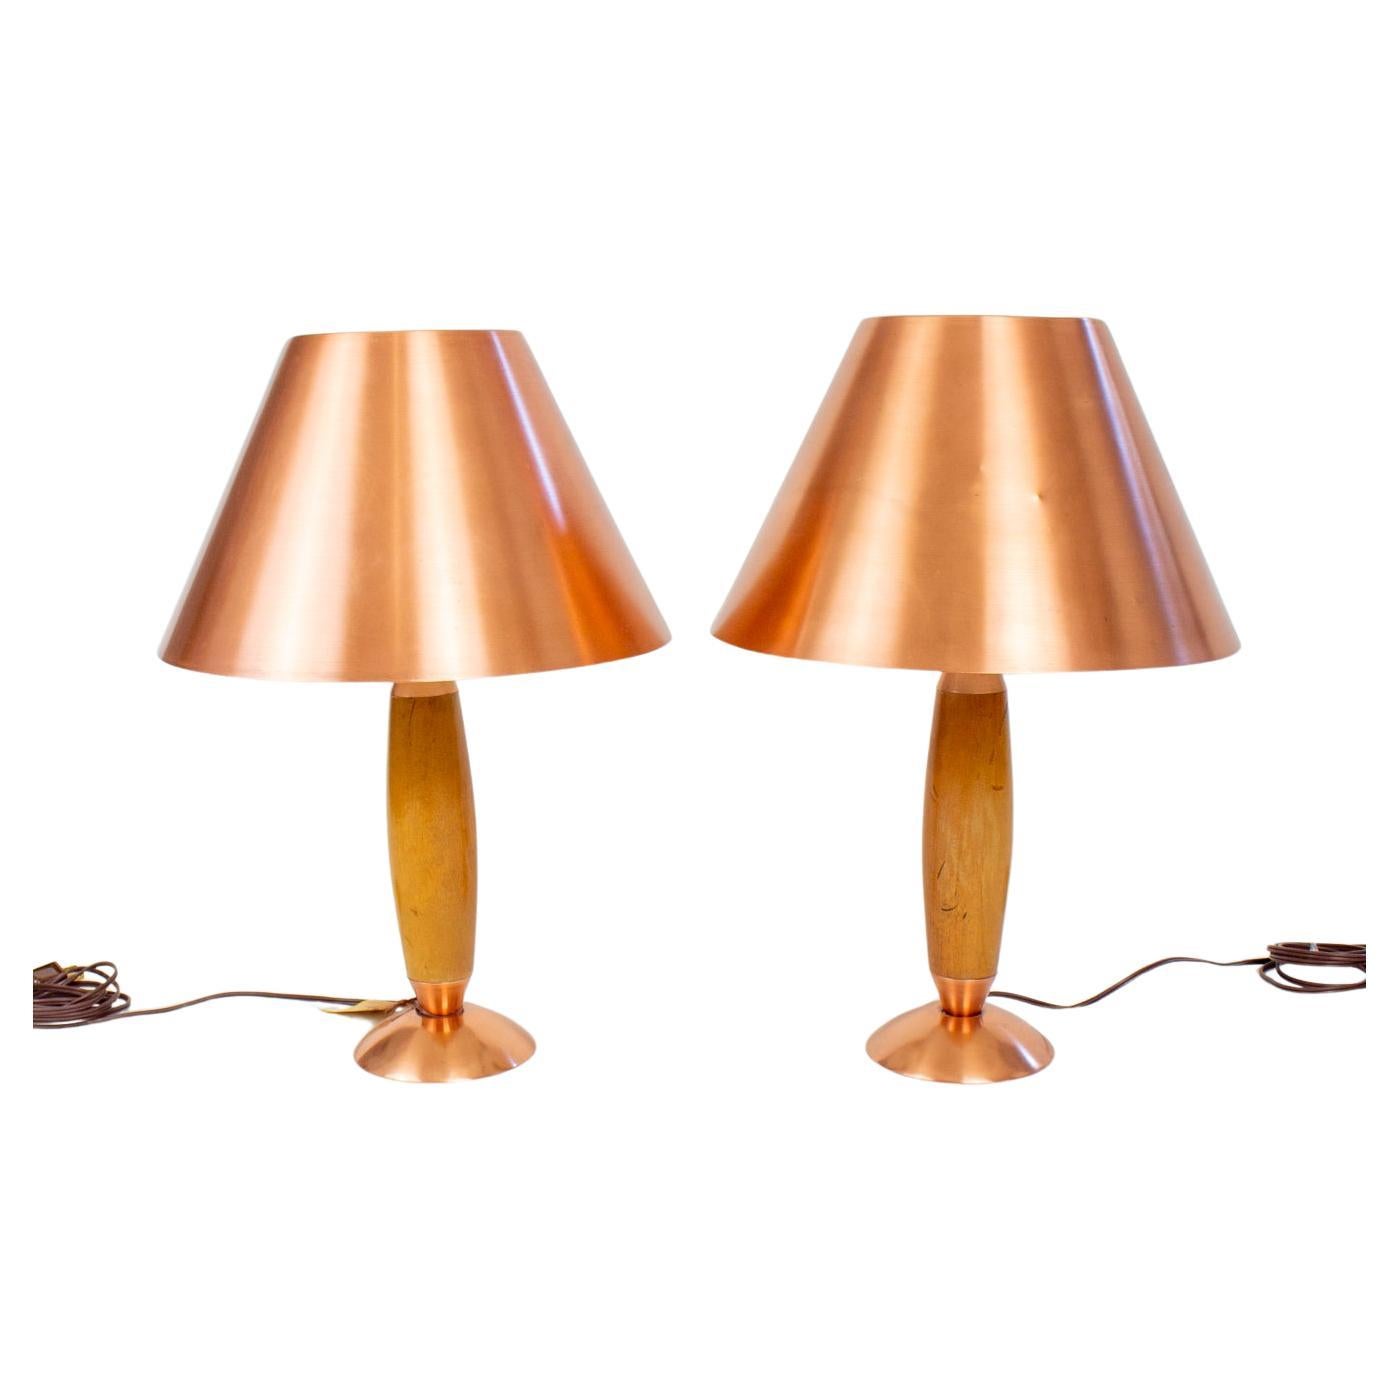 Mid 20th Century Copper and Wood Masterline Table Lamps - a Pair For Sale